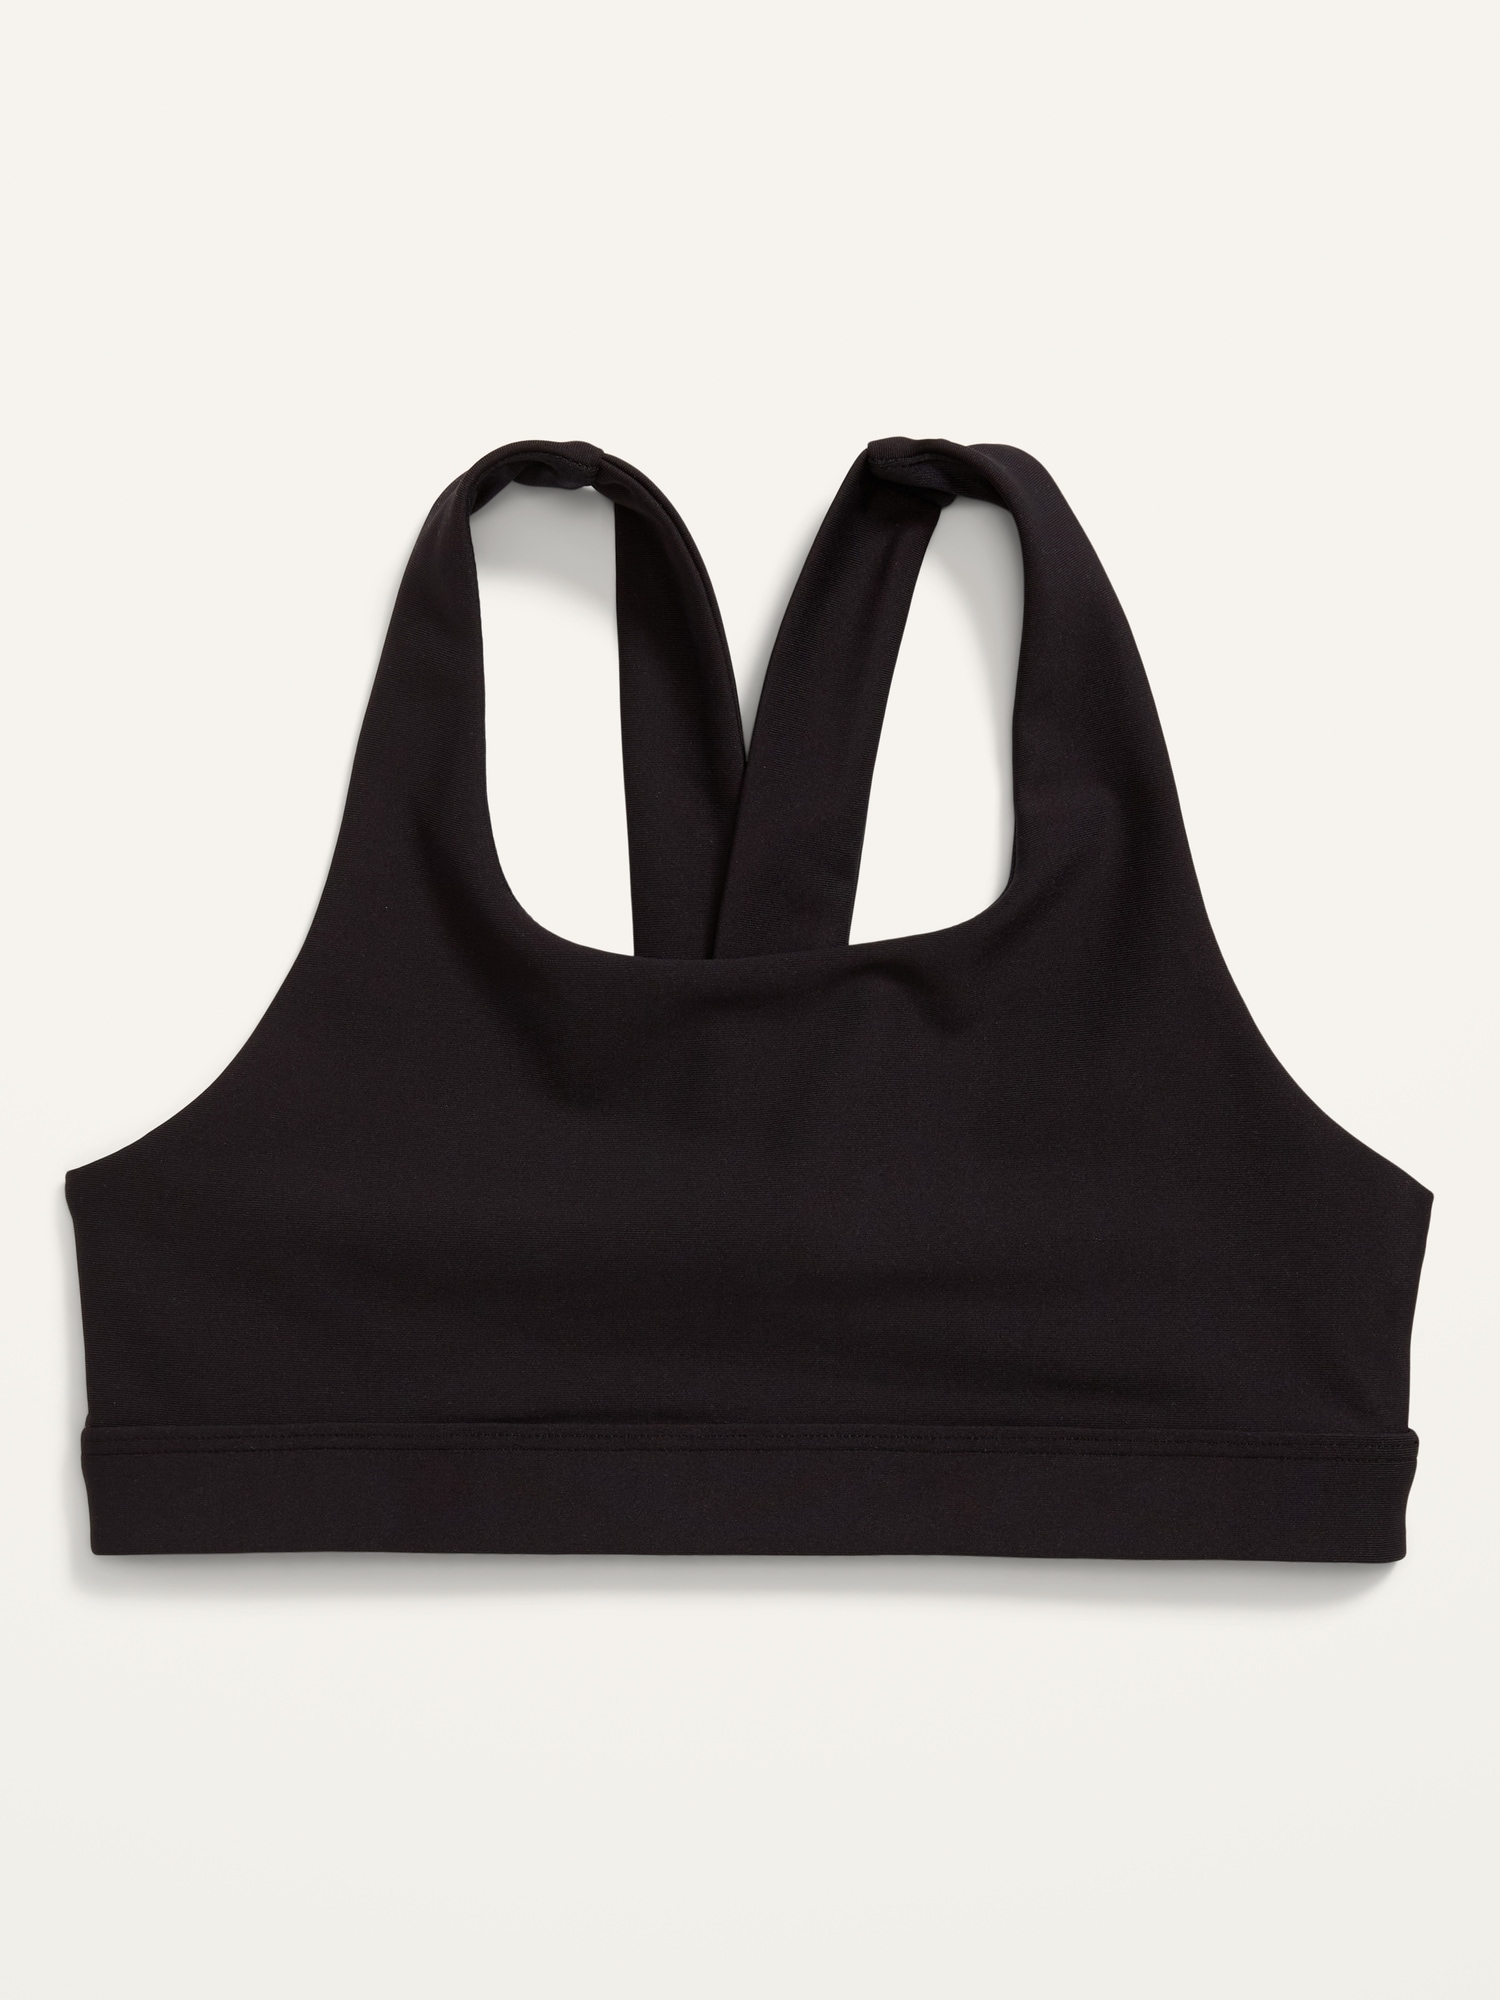 IN STOCK-M] HIGH NECK WOMAN DEEP V BACK SPORTS BRA, Women's Fashion,  Activewear on Carousell